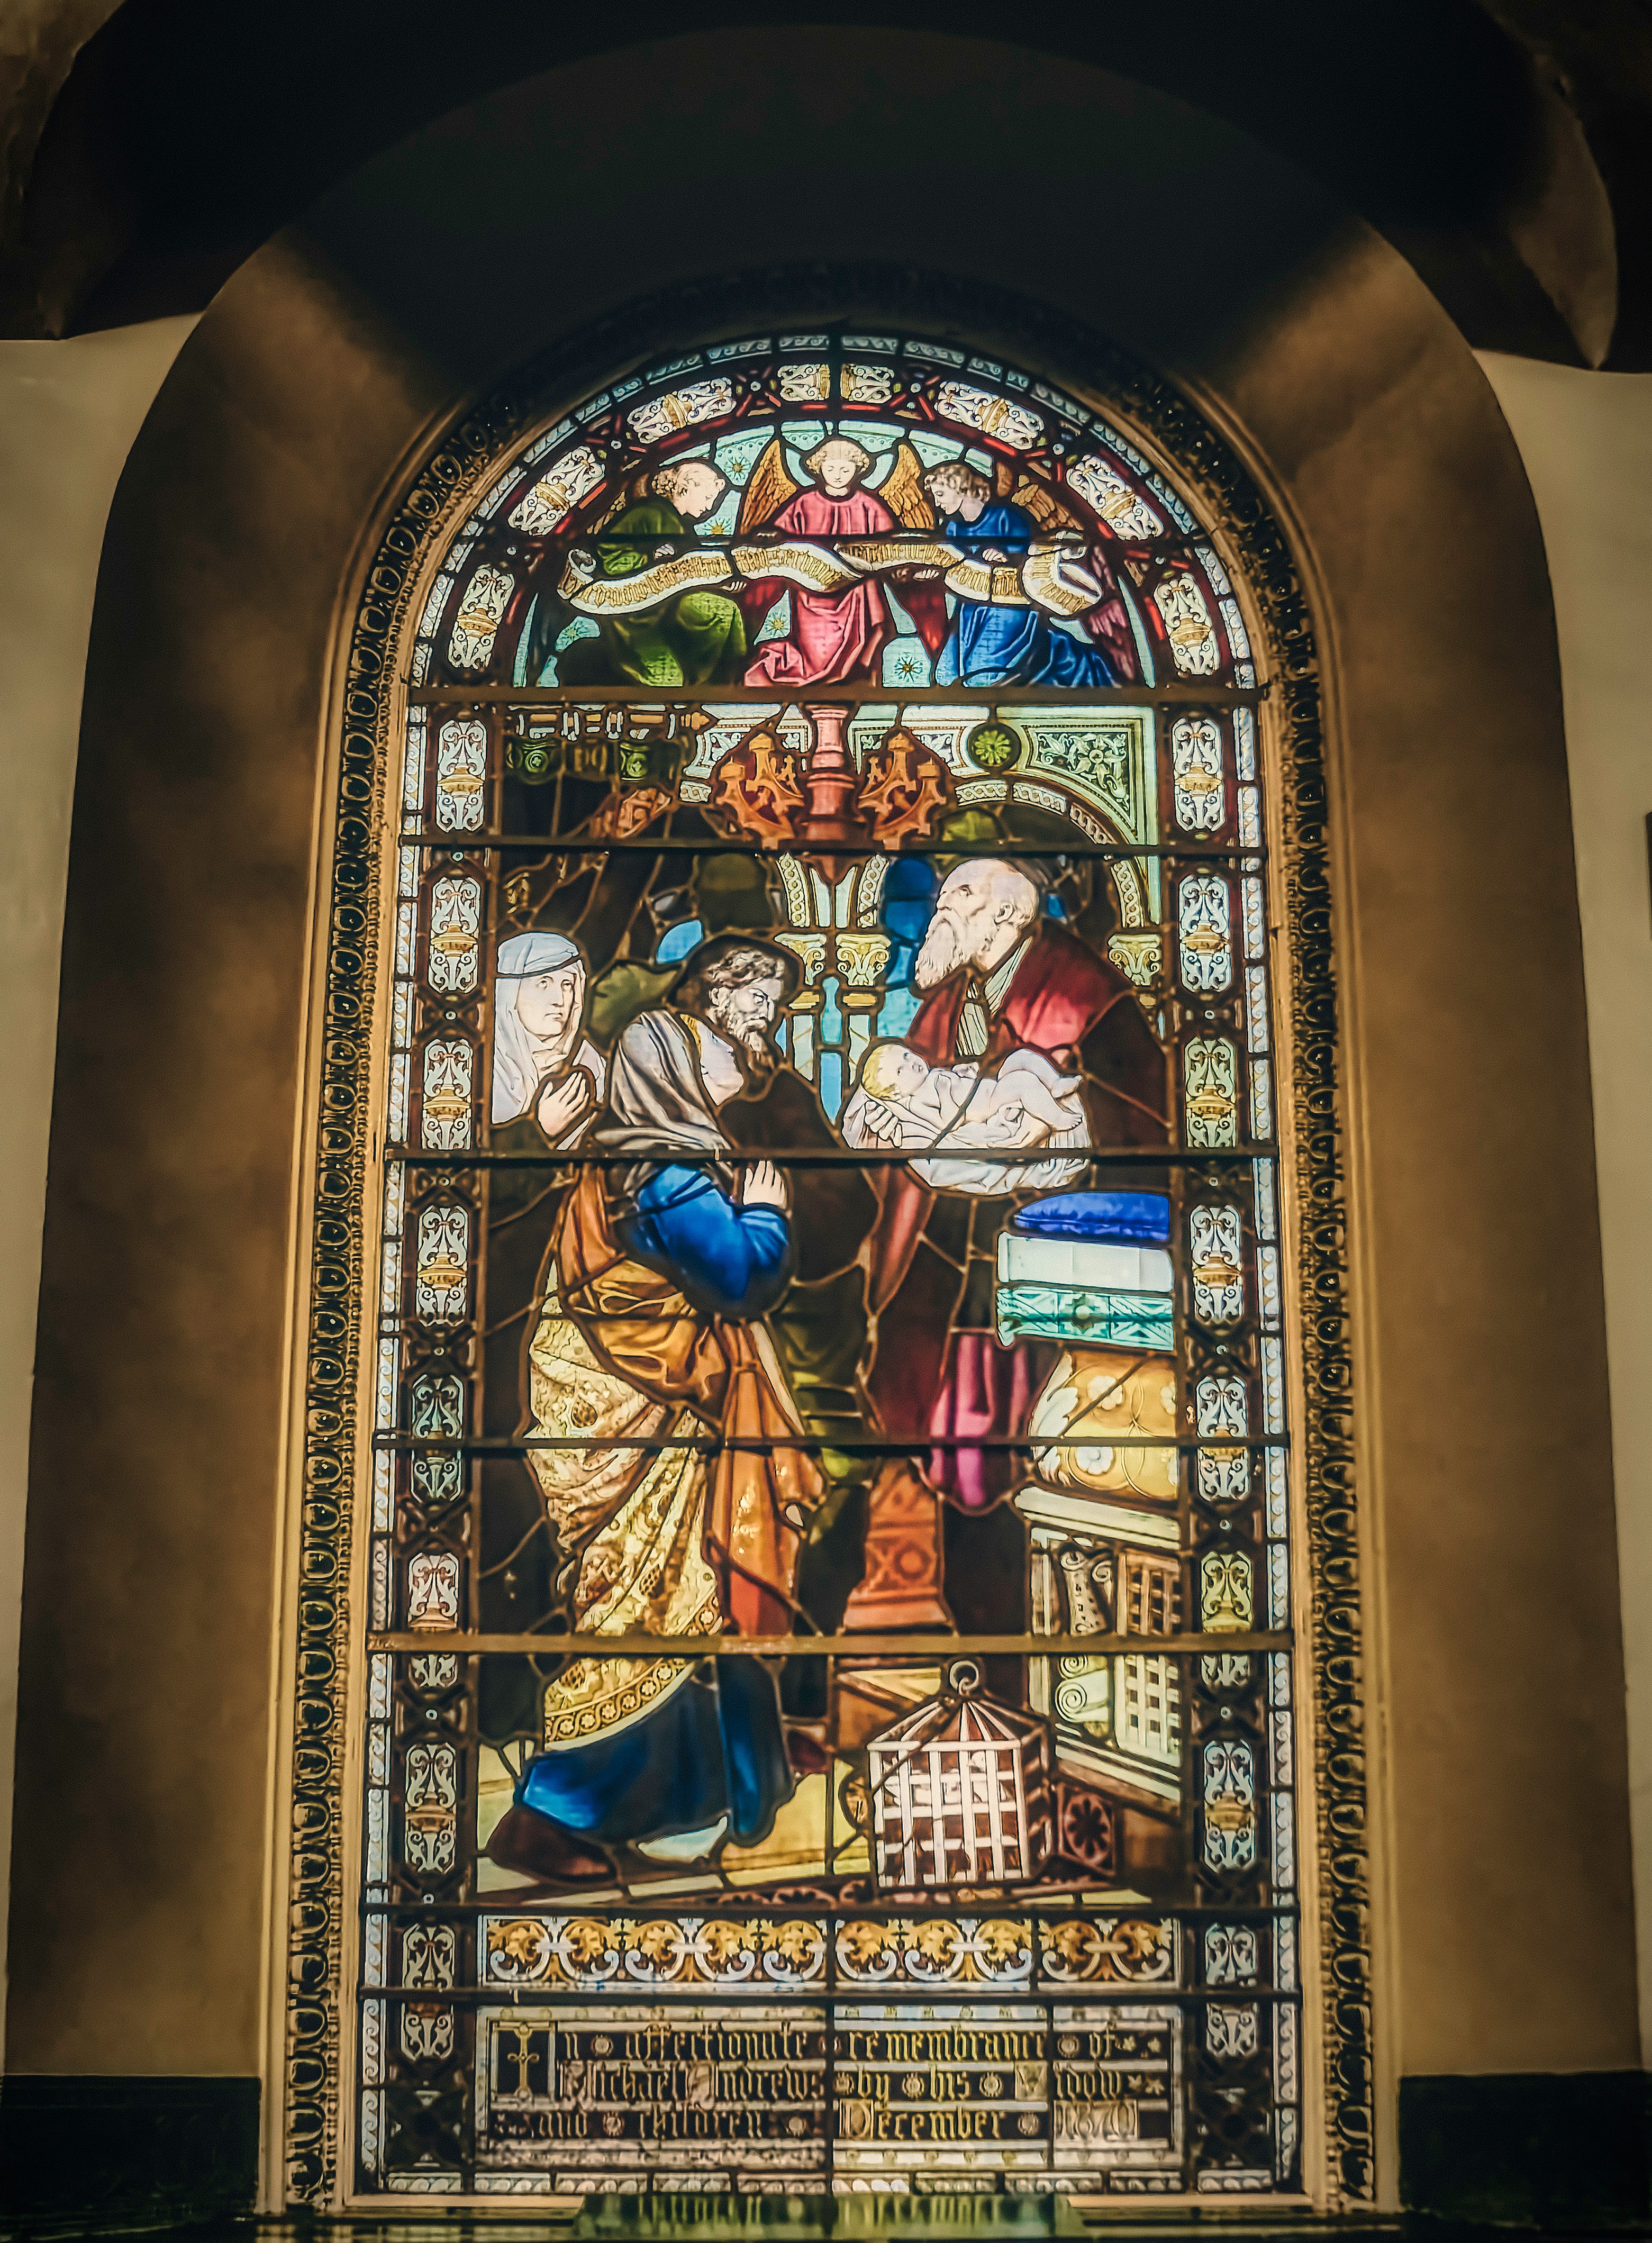 Stained-glass window in the First Presbyterian Church in Belfast's City Centre, which is Belfast's oldest surviving church building (built 1781-83). The scene depicts the story from Luke 2: 22-39 where the baby Jesus is taken to the temple in Jerusalem where Mary and Joseph encounter Simeon and the prophetess Anna (Jan., 2020).